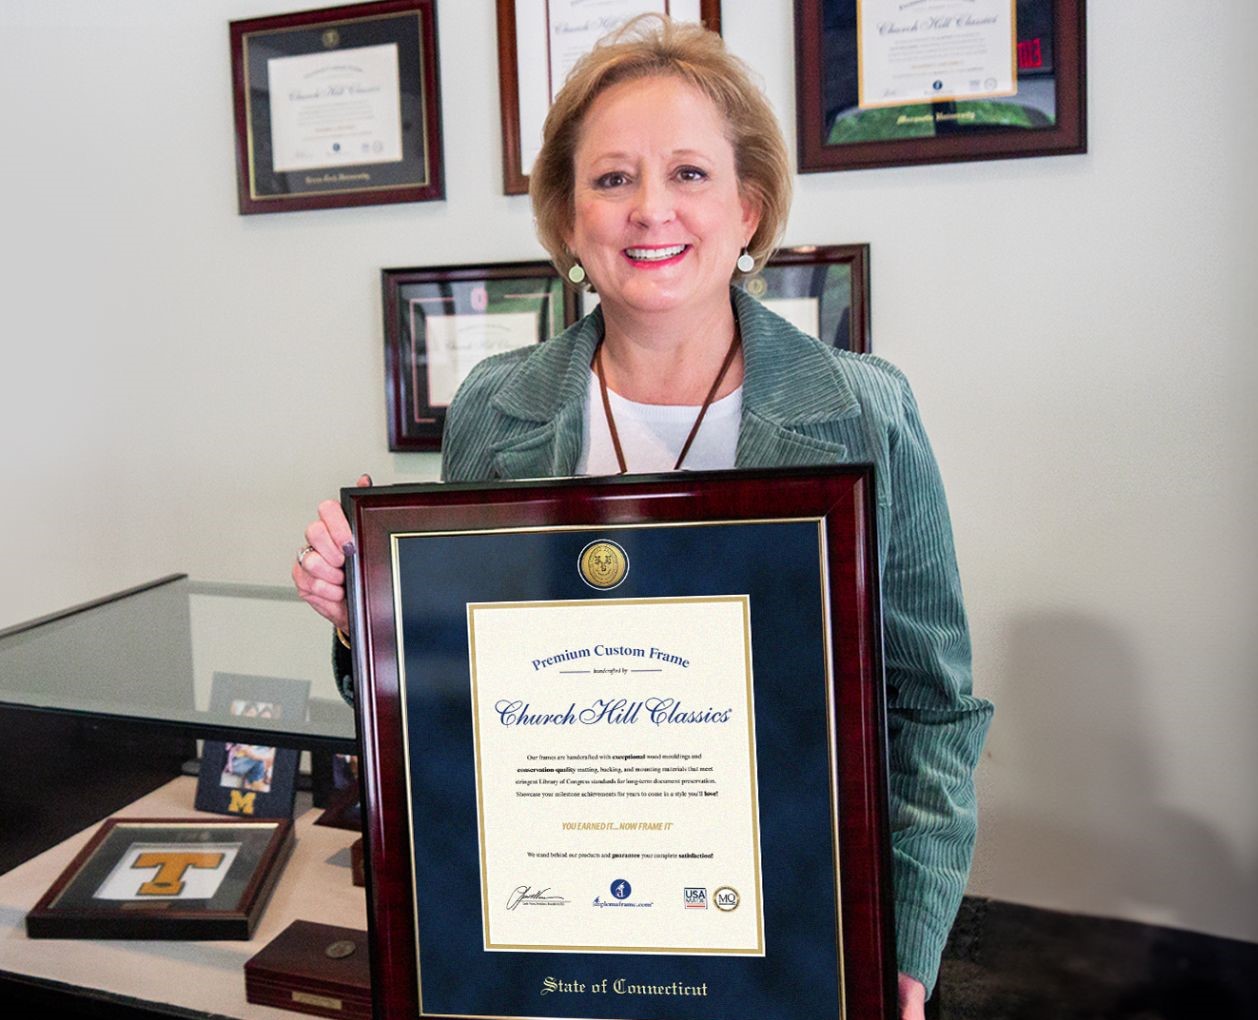 Lucie Voves holding State of Connecticut license frame